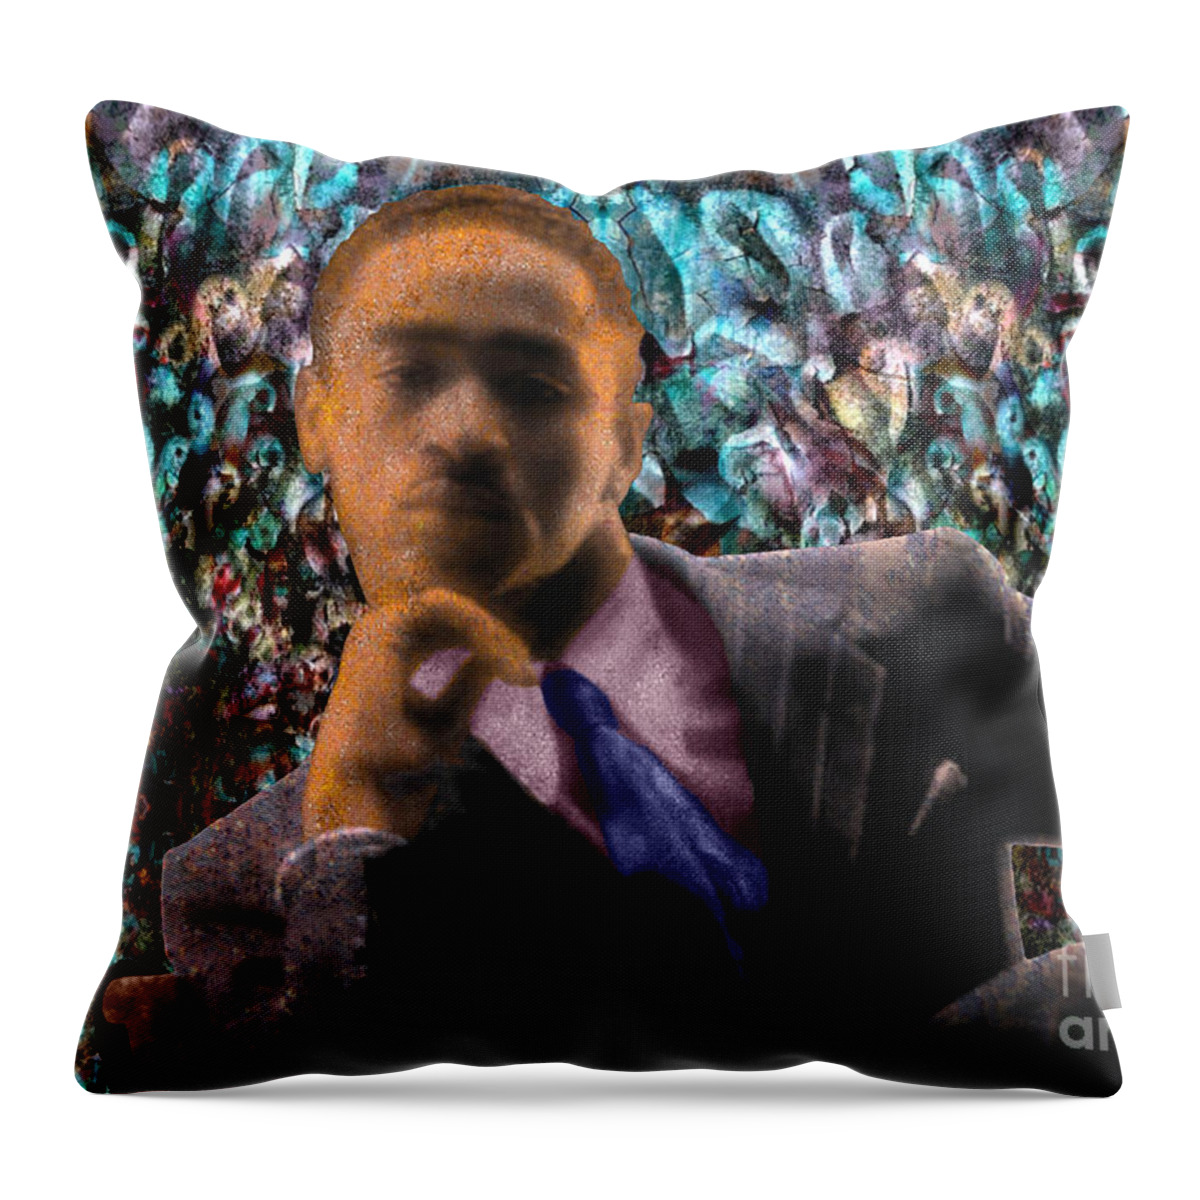 Portraits Throw Pillow featuring the digital art Jose Extravaganza by Walter Neal